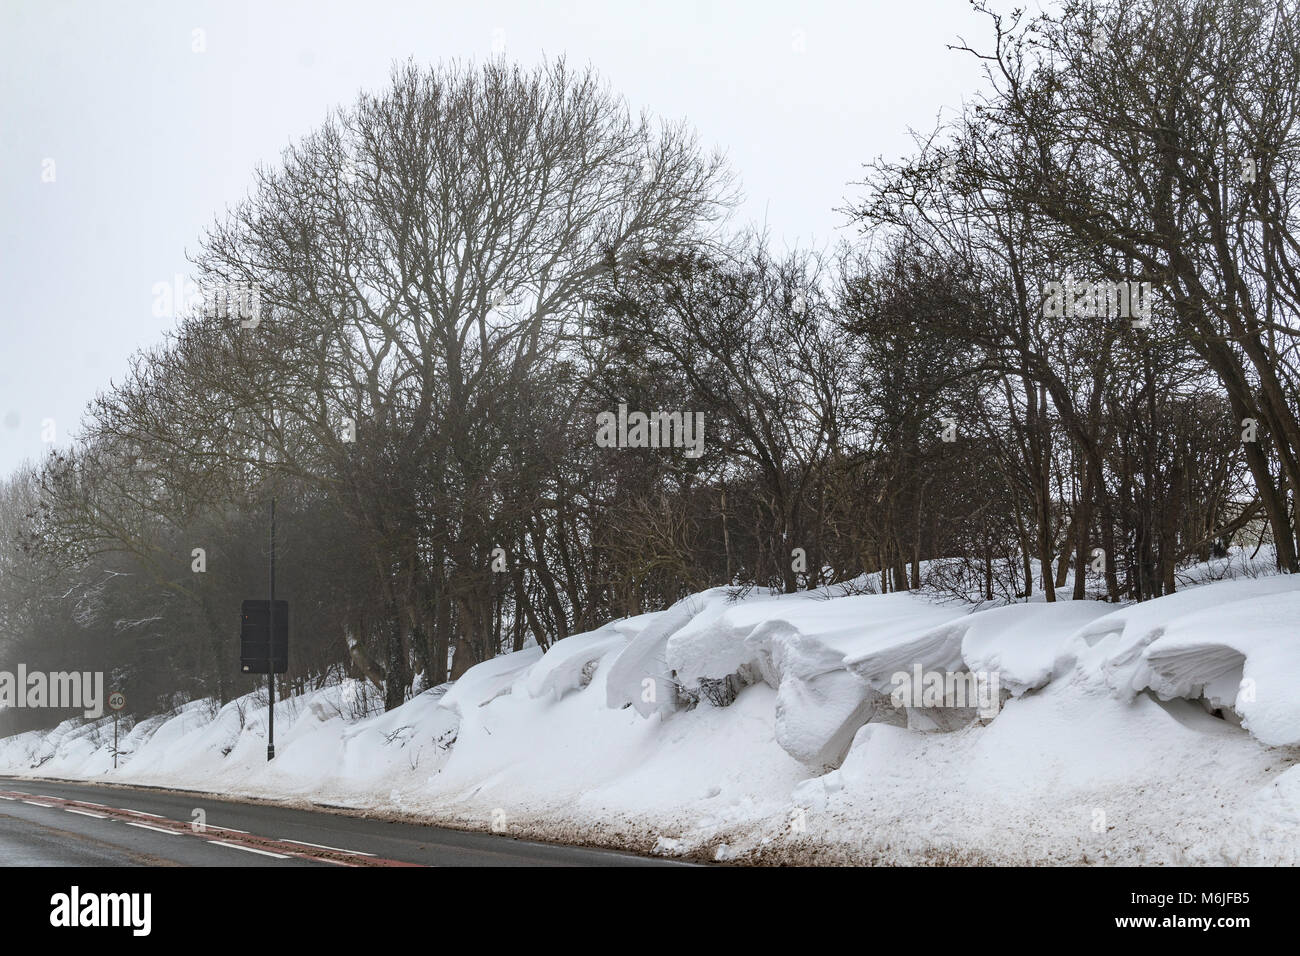 An image taken on a winters morning of snowdrifts at the side of the road, Kibworth Harcourt, Leicestershire, England, UK Stock Photo